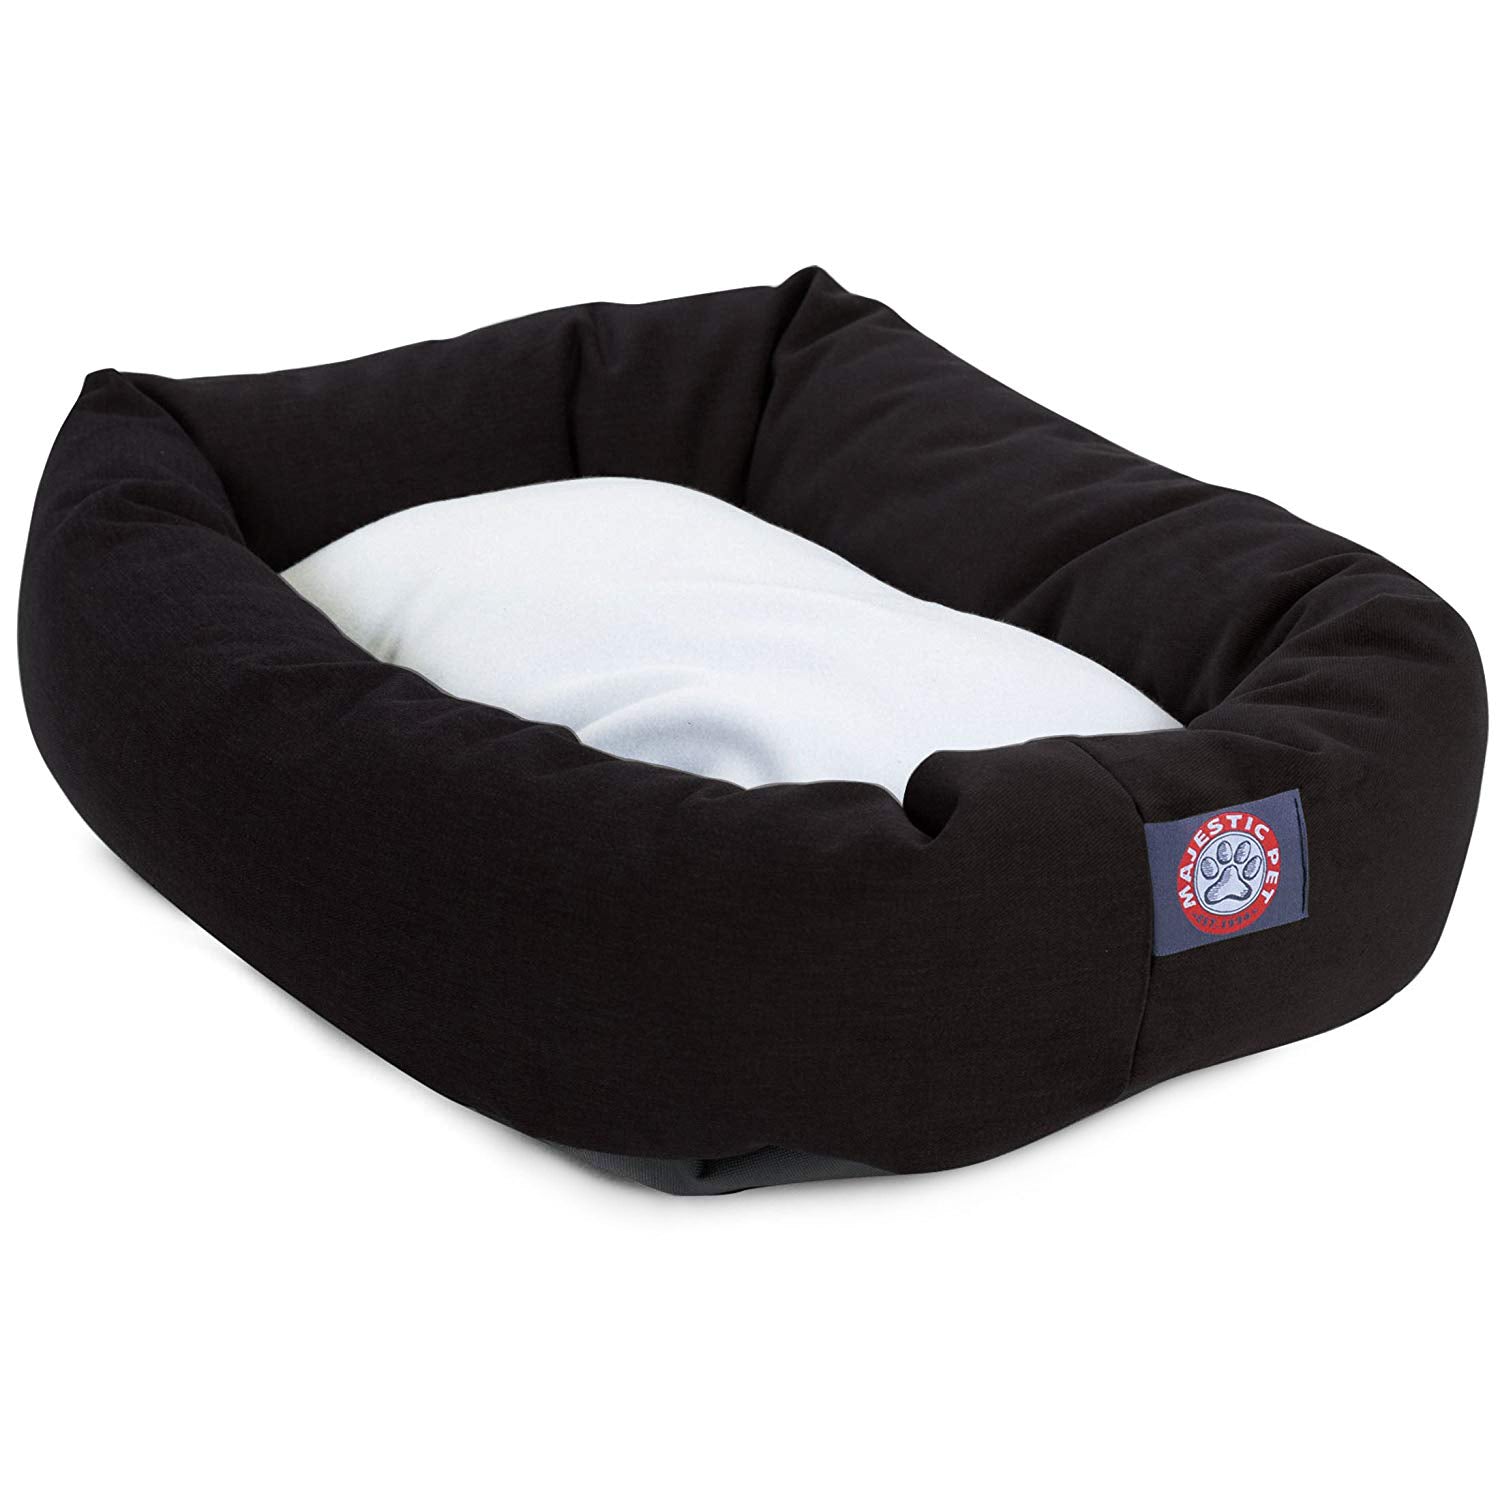 Majestic Pet | Poly/Cotton Sherpa Bagel Pet Bed For Dogs， Black， Small